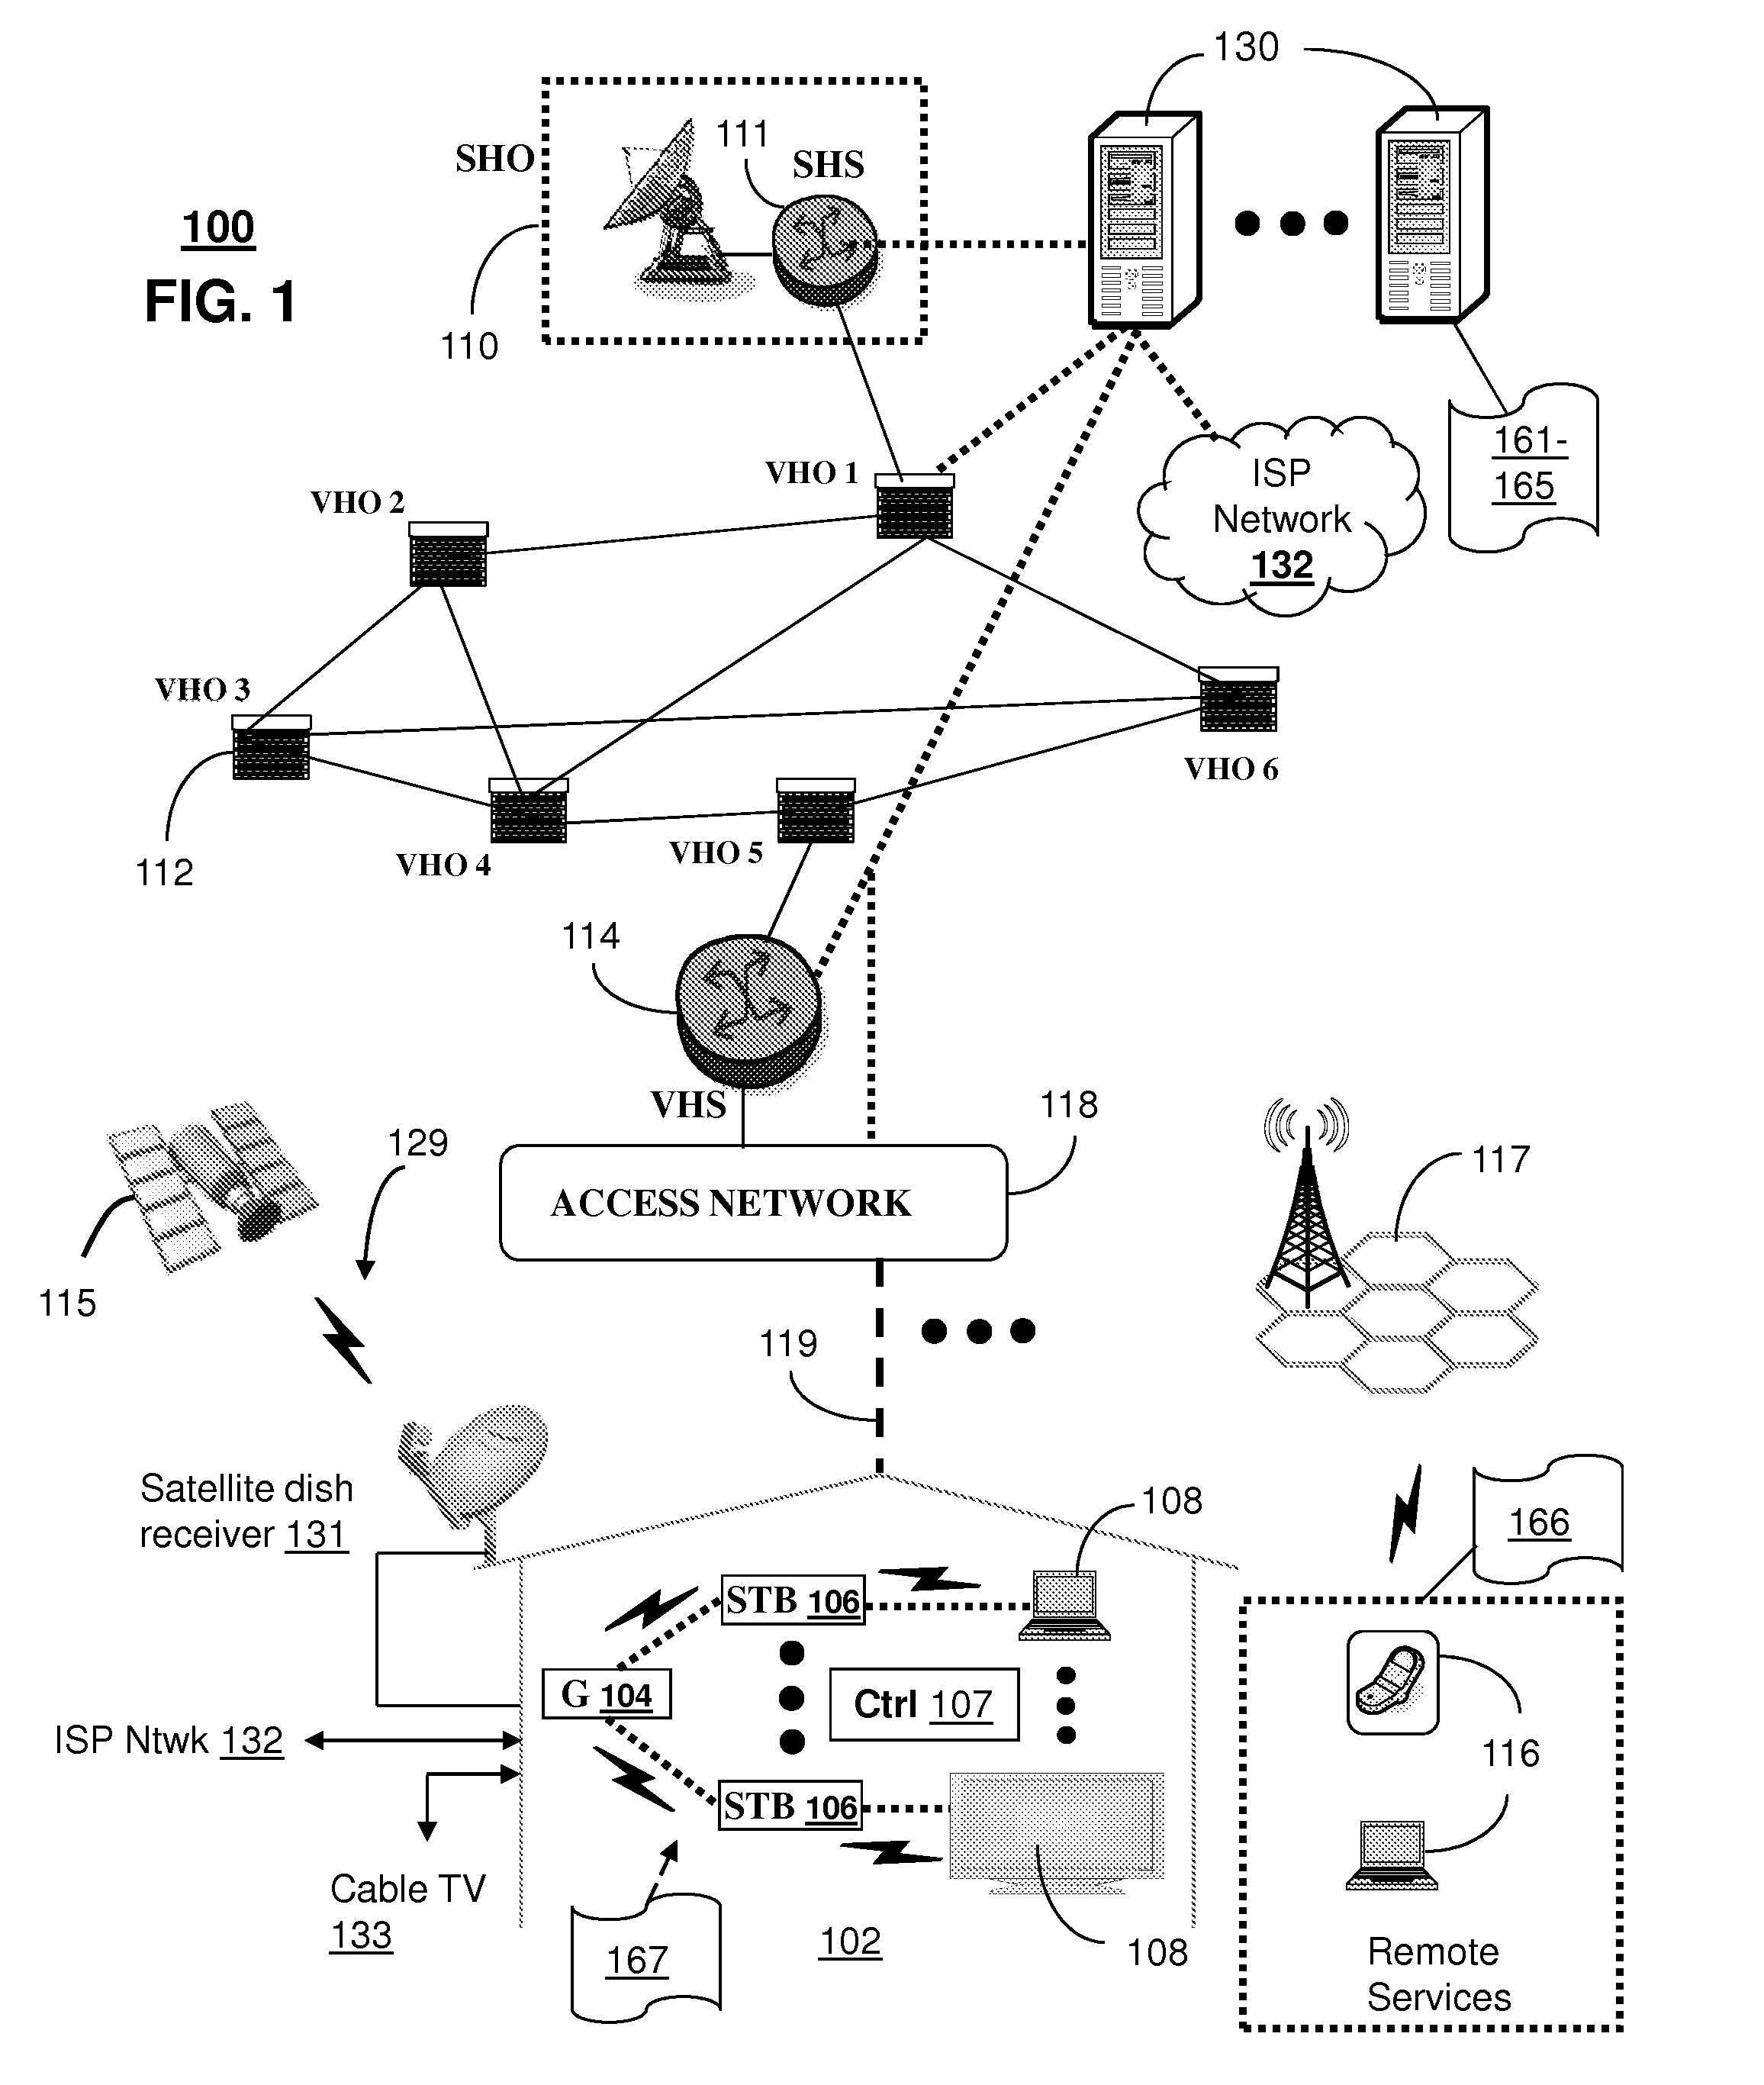 Method and apparatus for associating micro-blogs with media programs